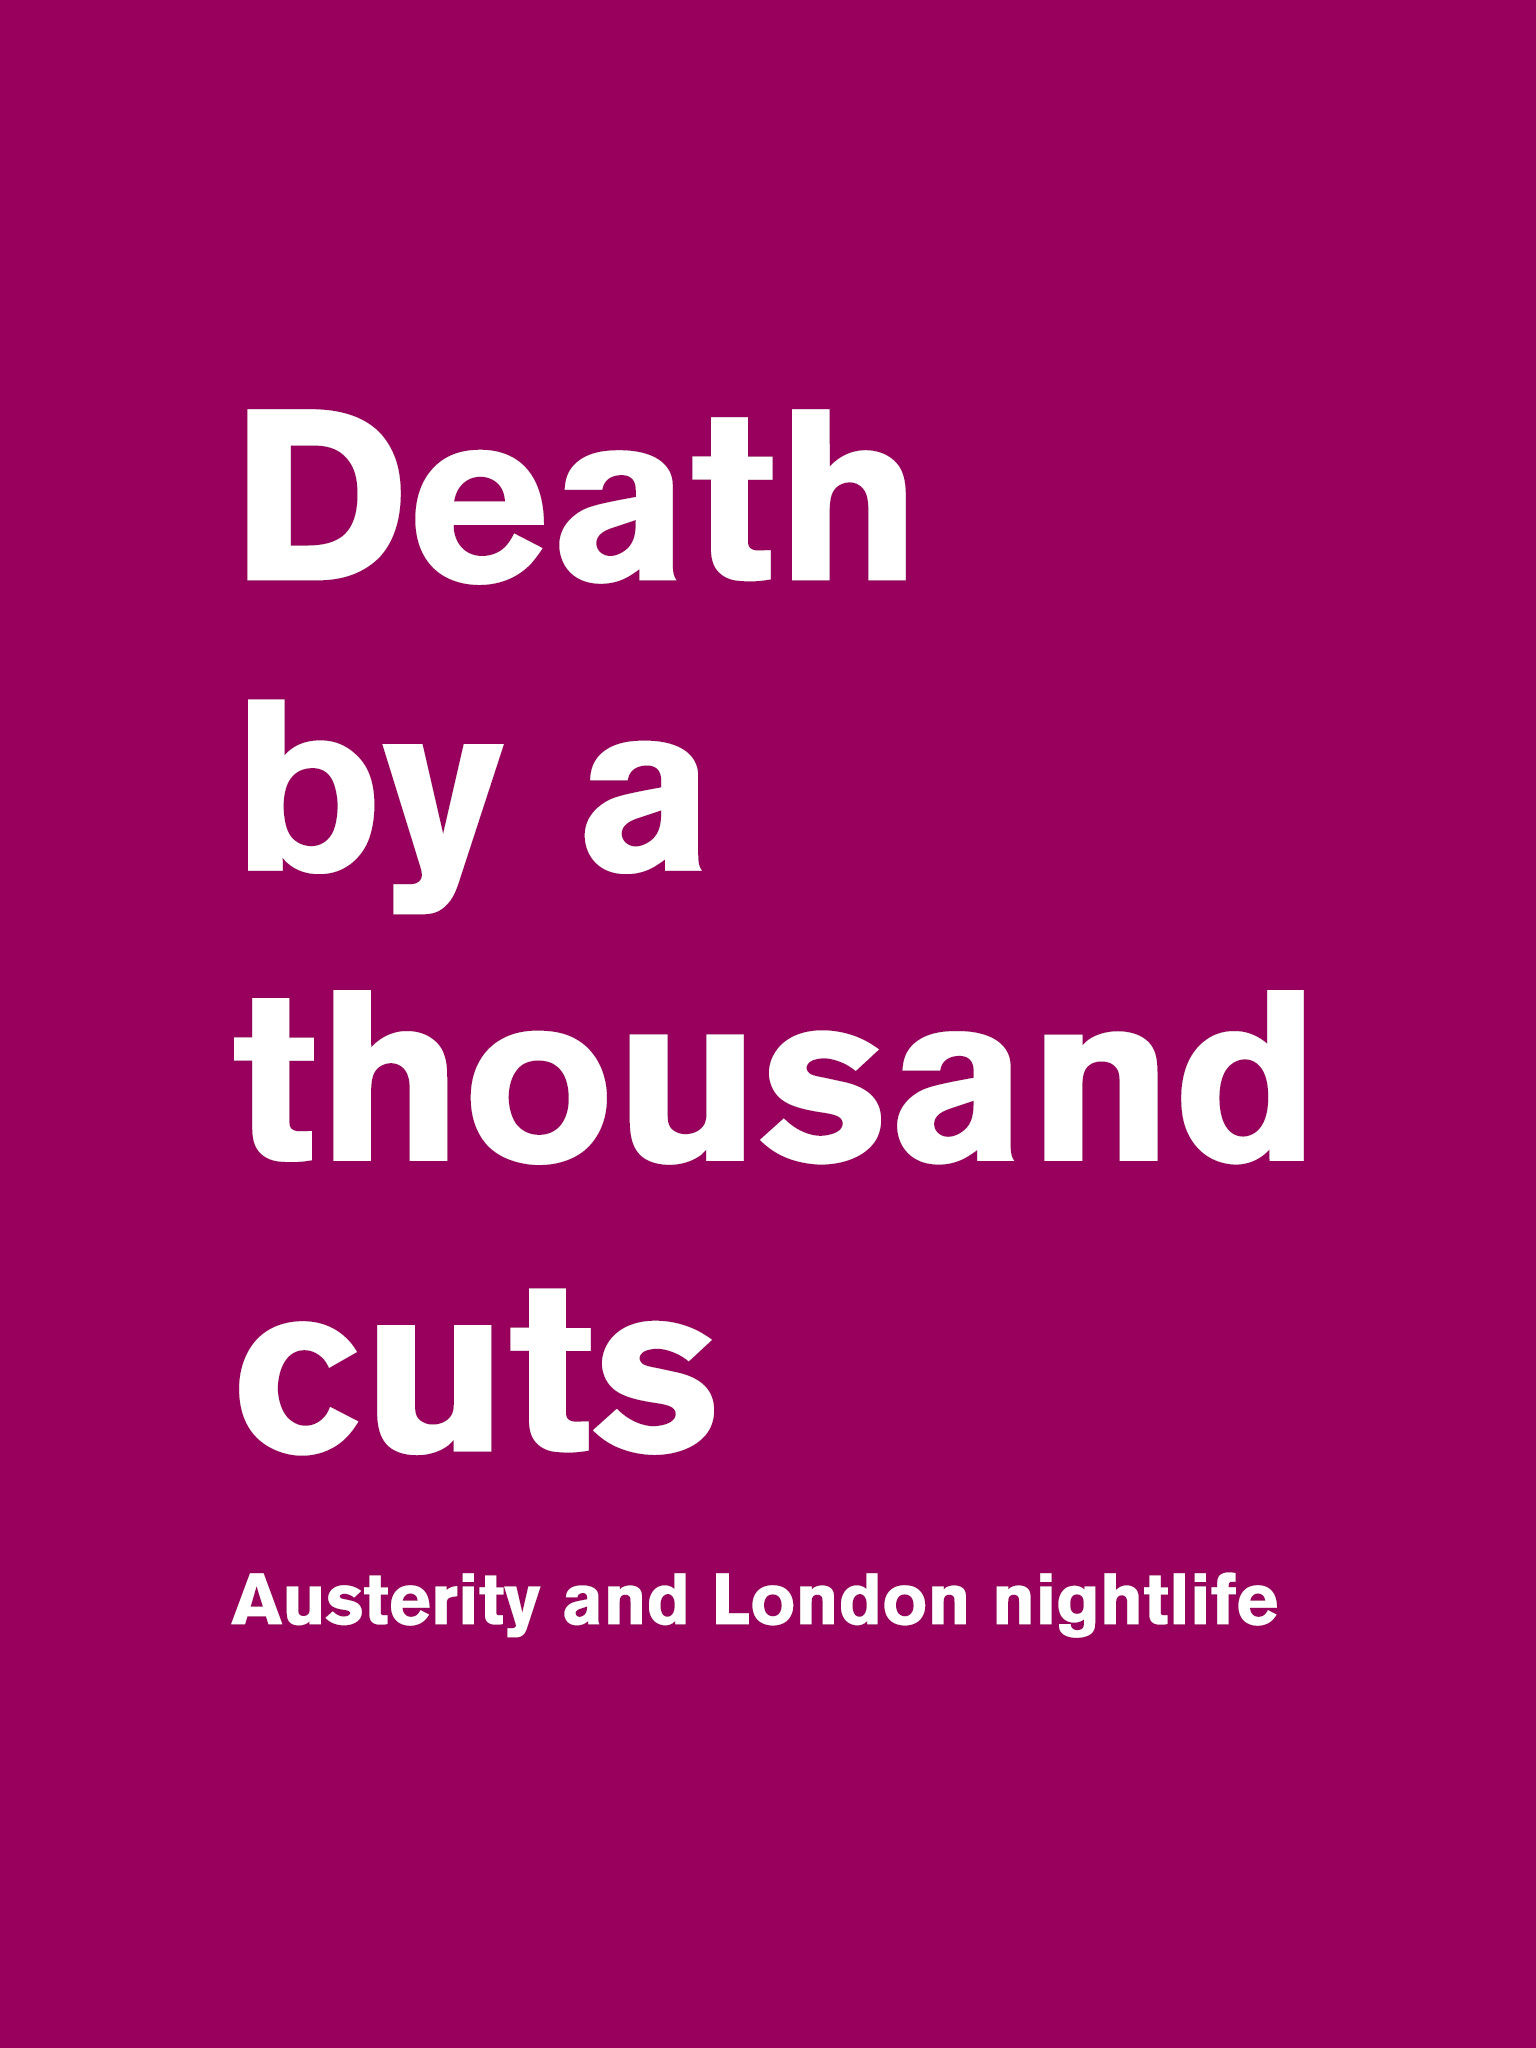 Death by a thousand cuts: Austerity and London nightlife